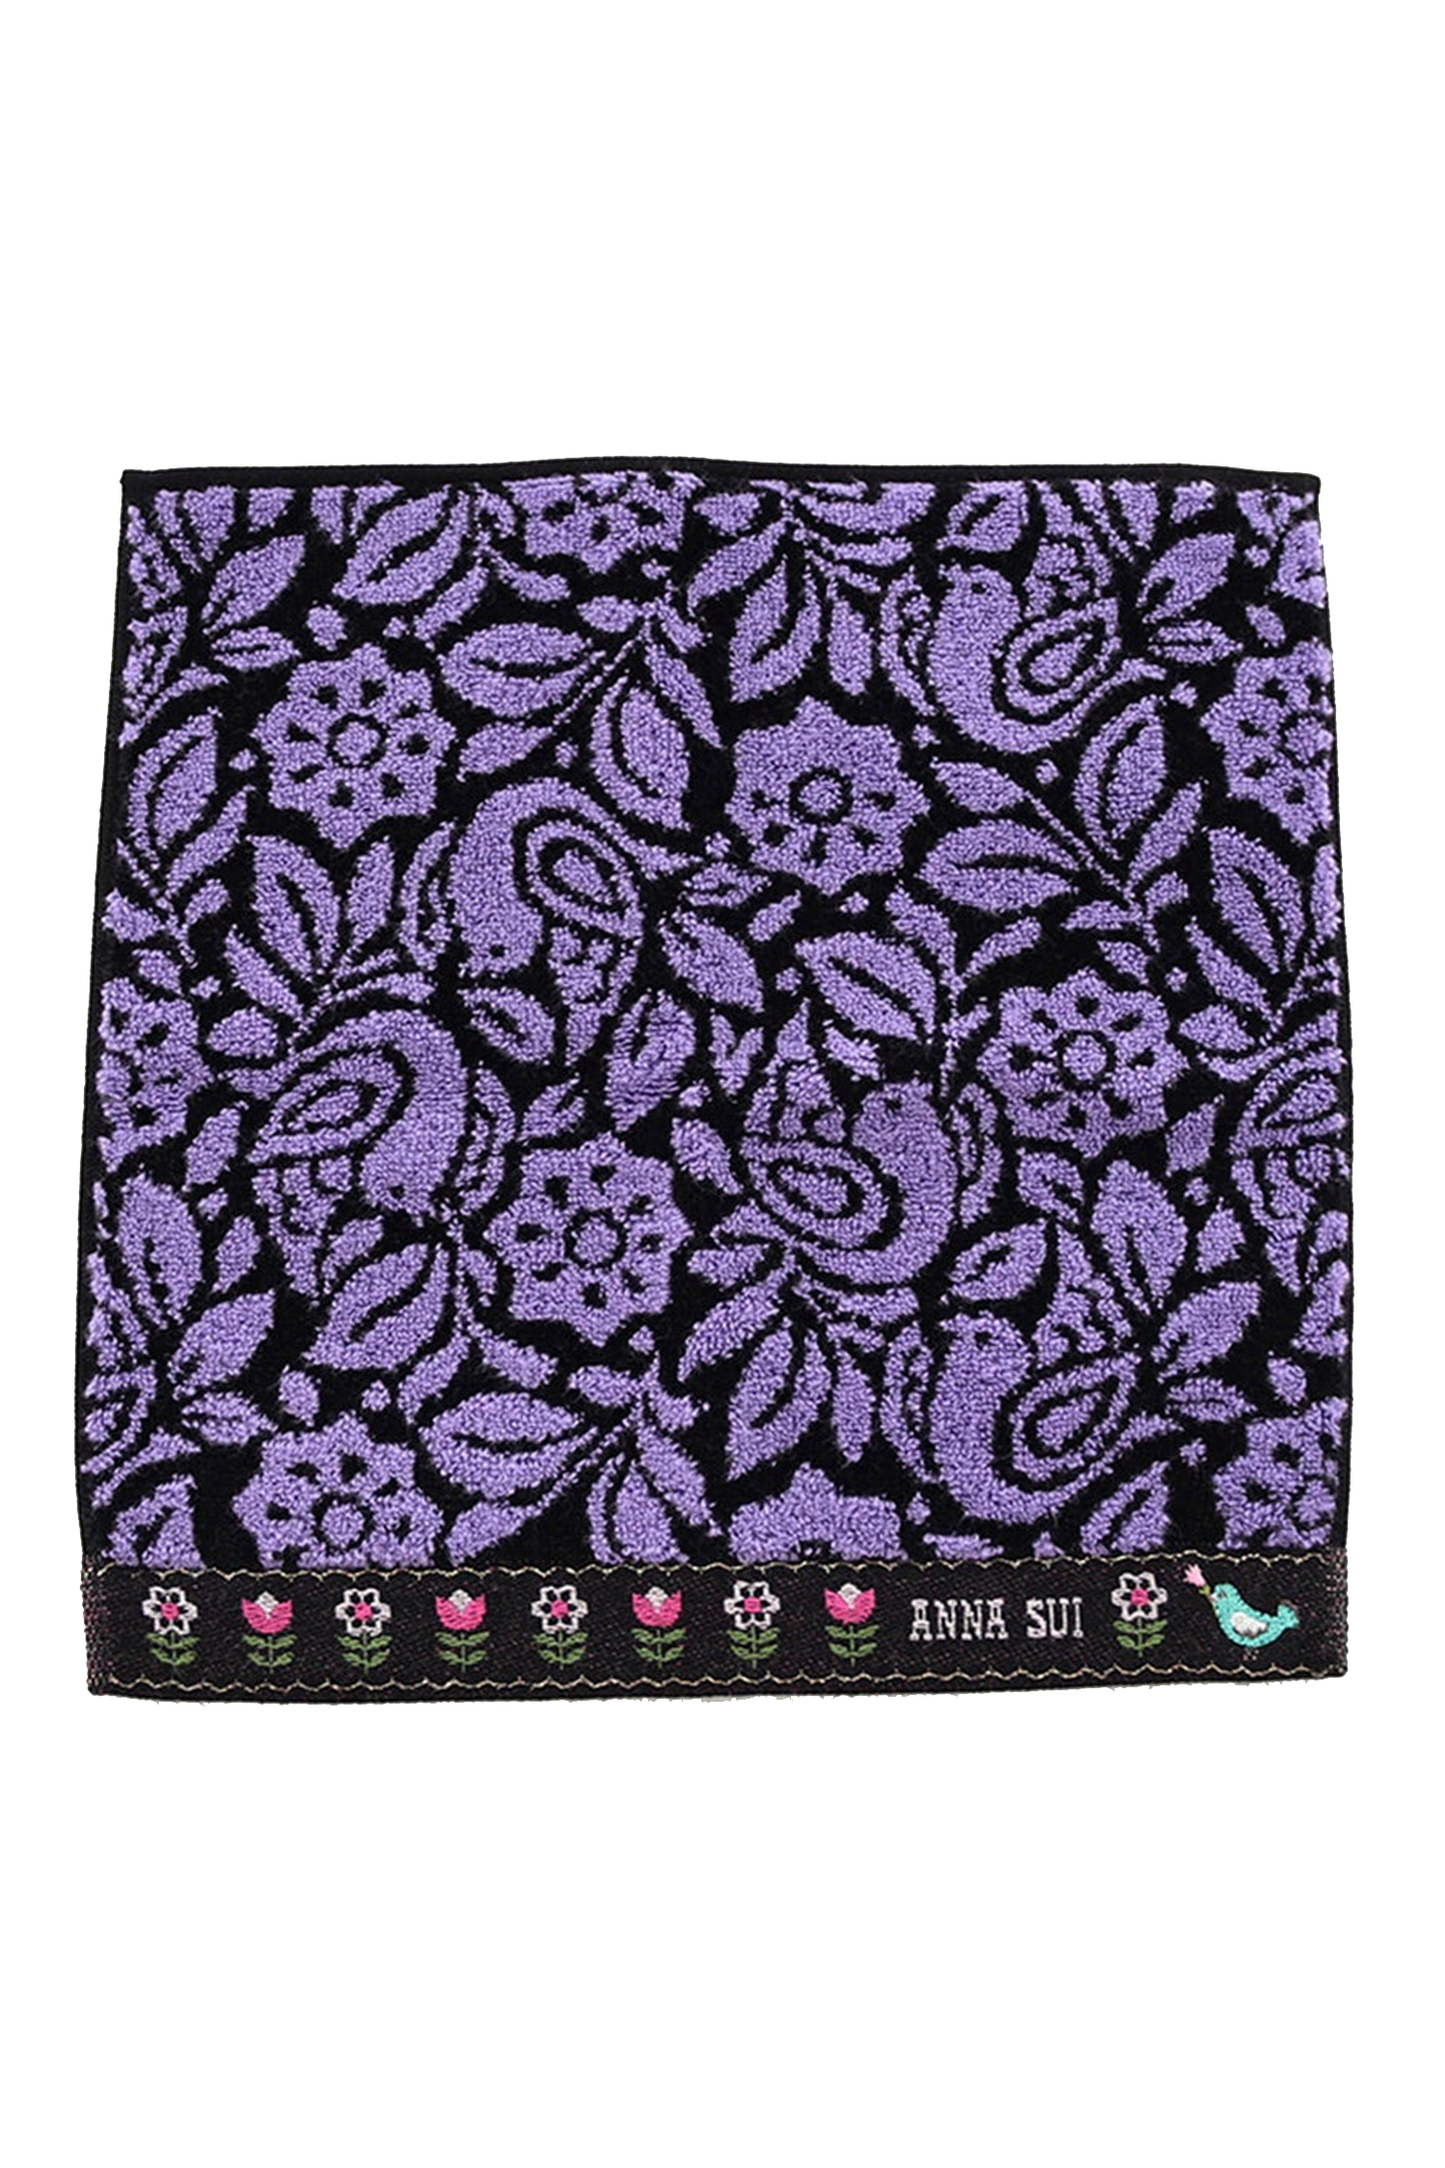 Washcloth, purple, with birds/floral design, border bottom with Anna Sui label, a bird, line of flowers